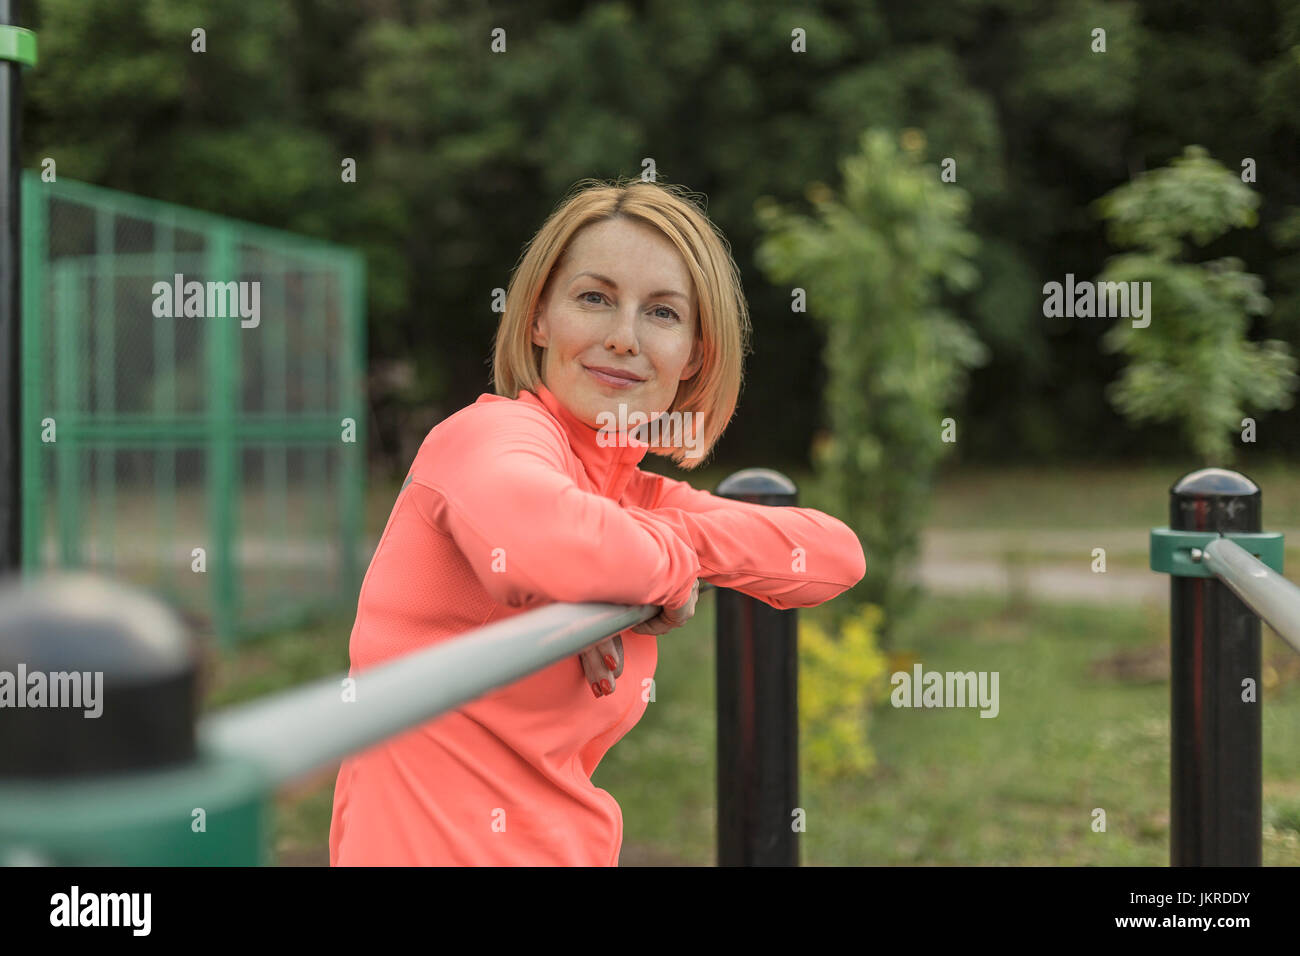 Portrait of smiling mature woman leaning on railing against trees at park Stock Photo